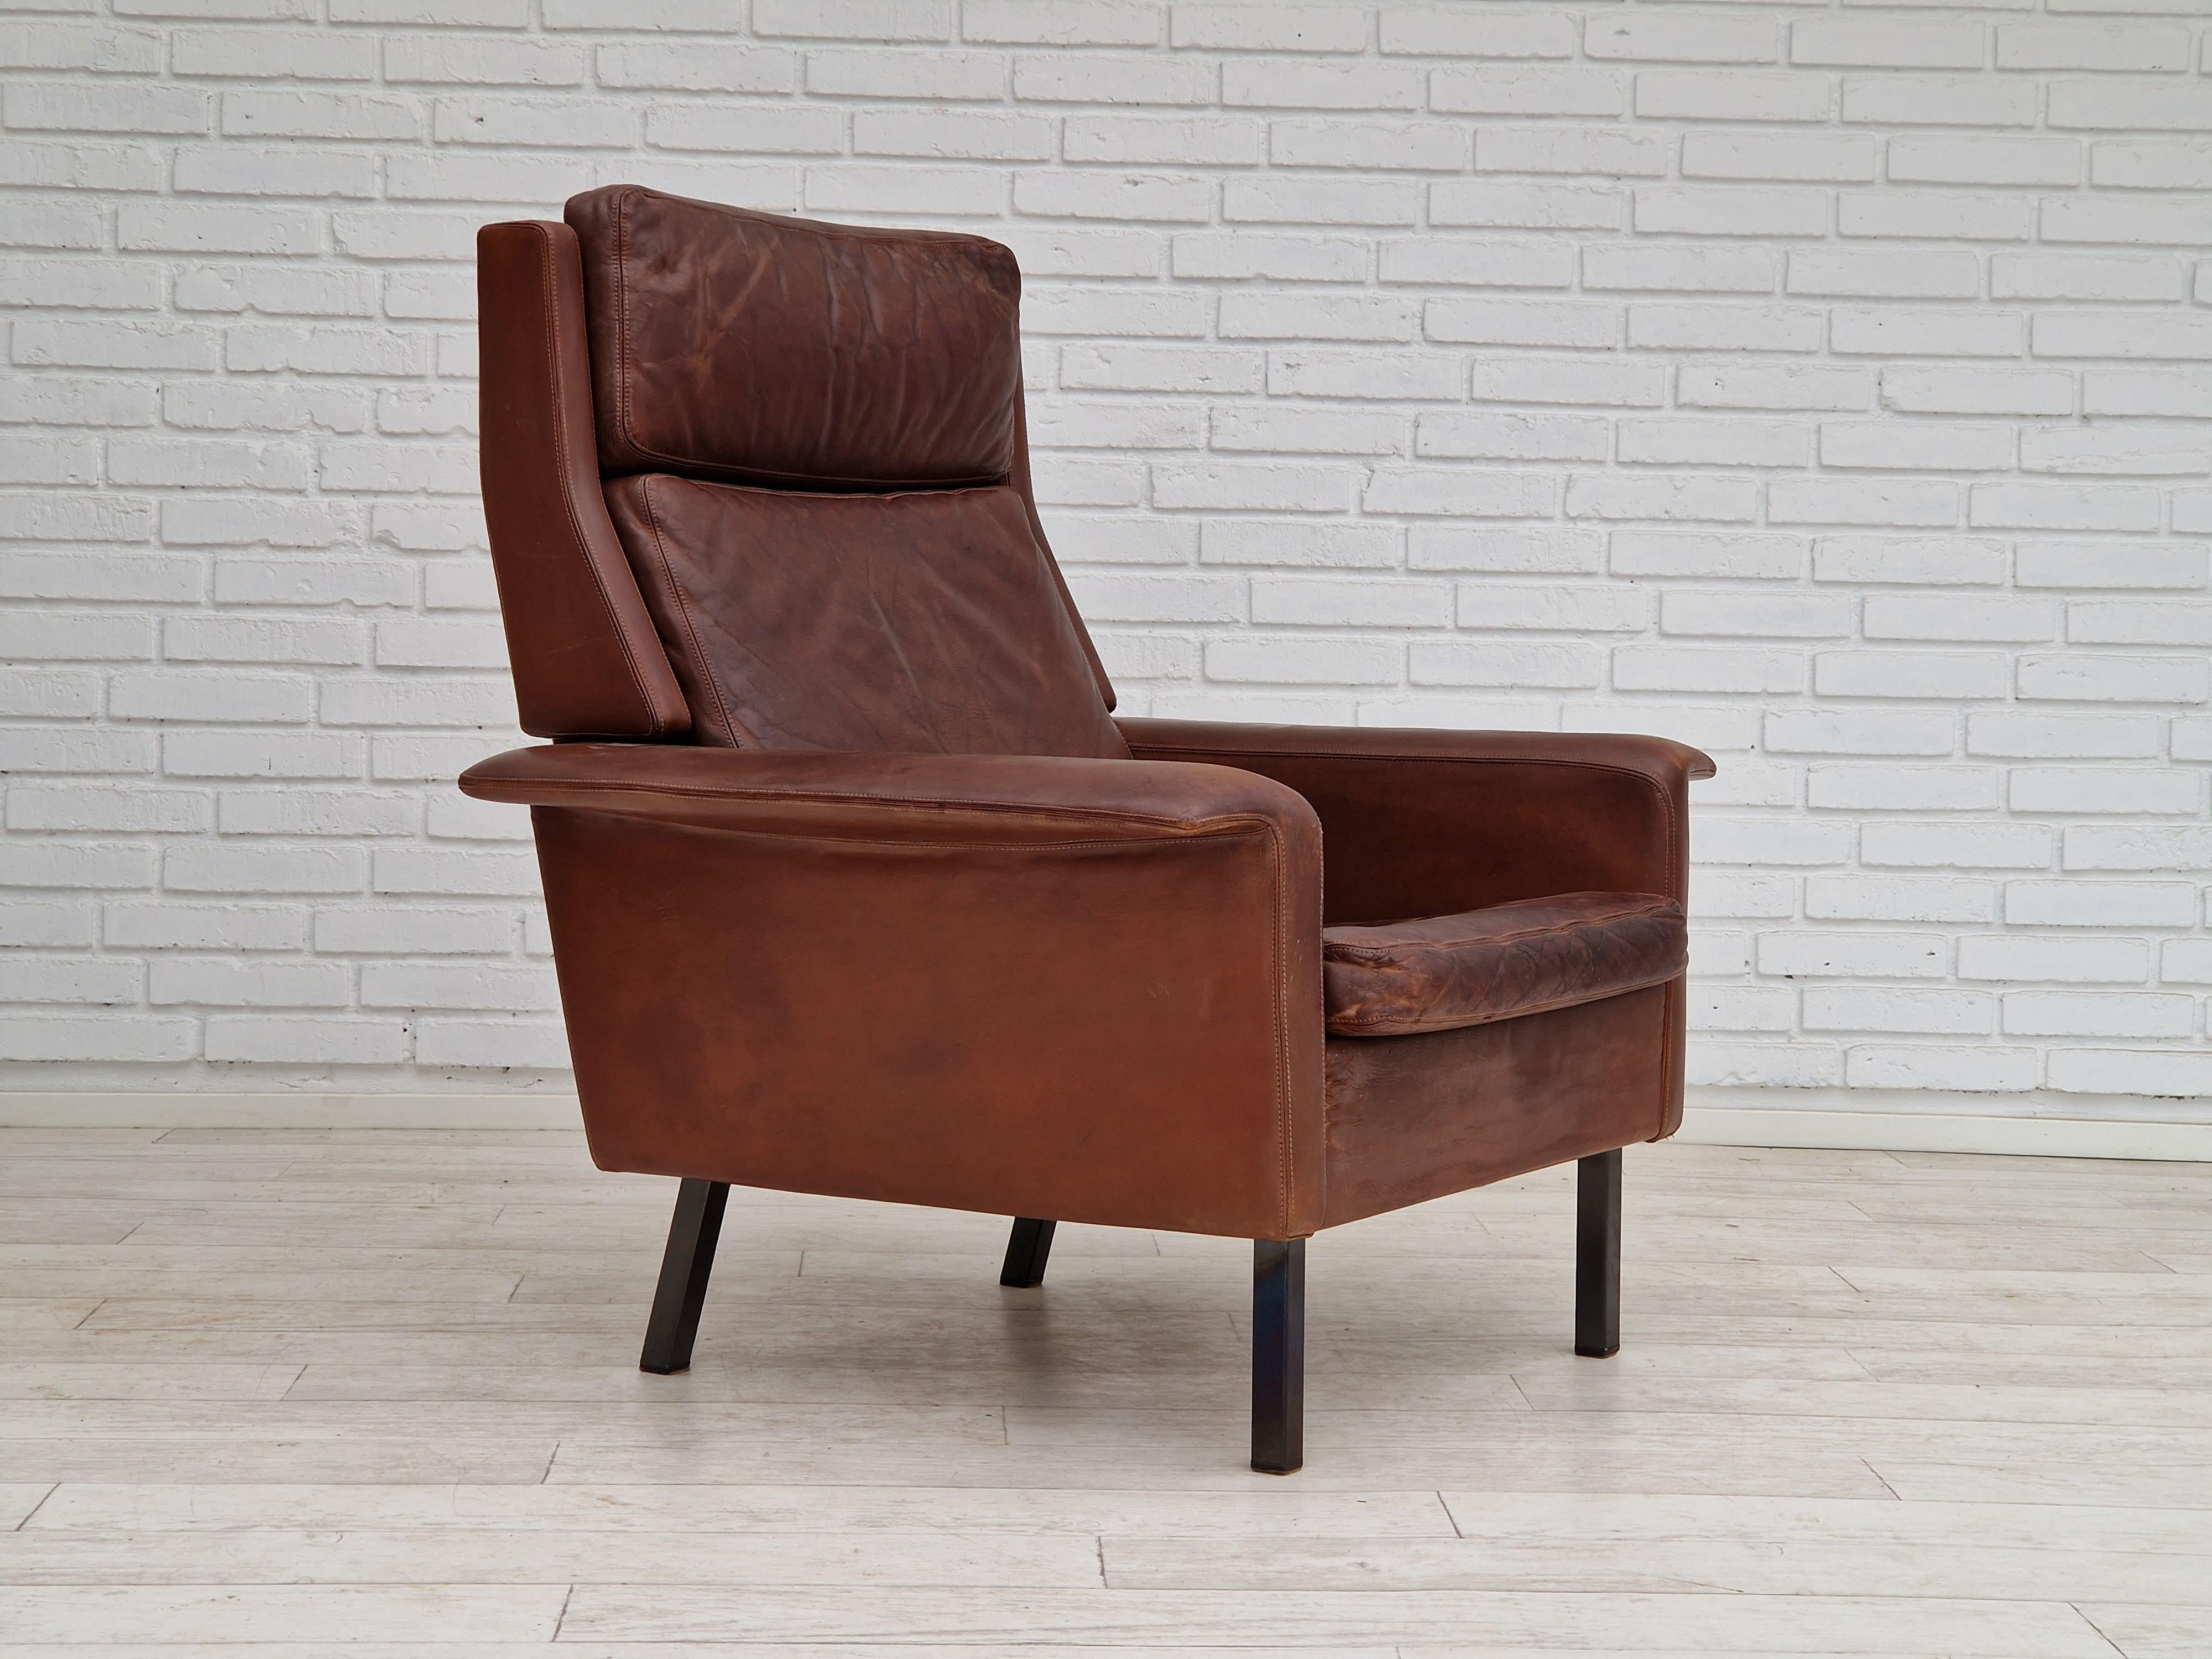 1970s, Danish design by Arne Vodder, model 7401. High back armchair in original dark camel-brun leather with a nice patina. Original very good condition: no smells and no stains. Legs of steel and lose cushions. Made by Danish furniture manufacturer